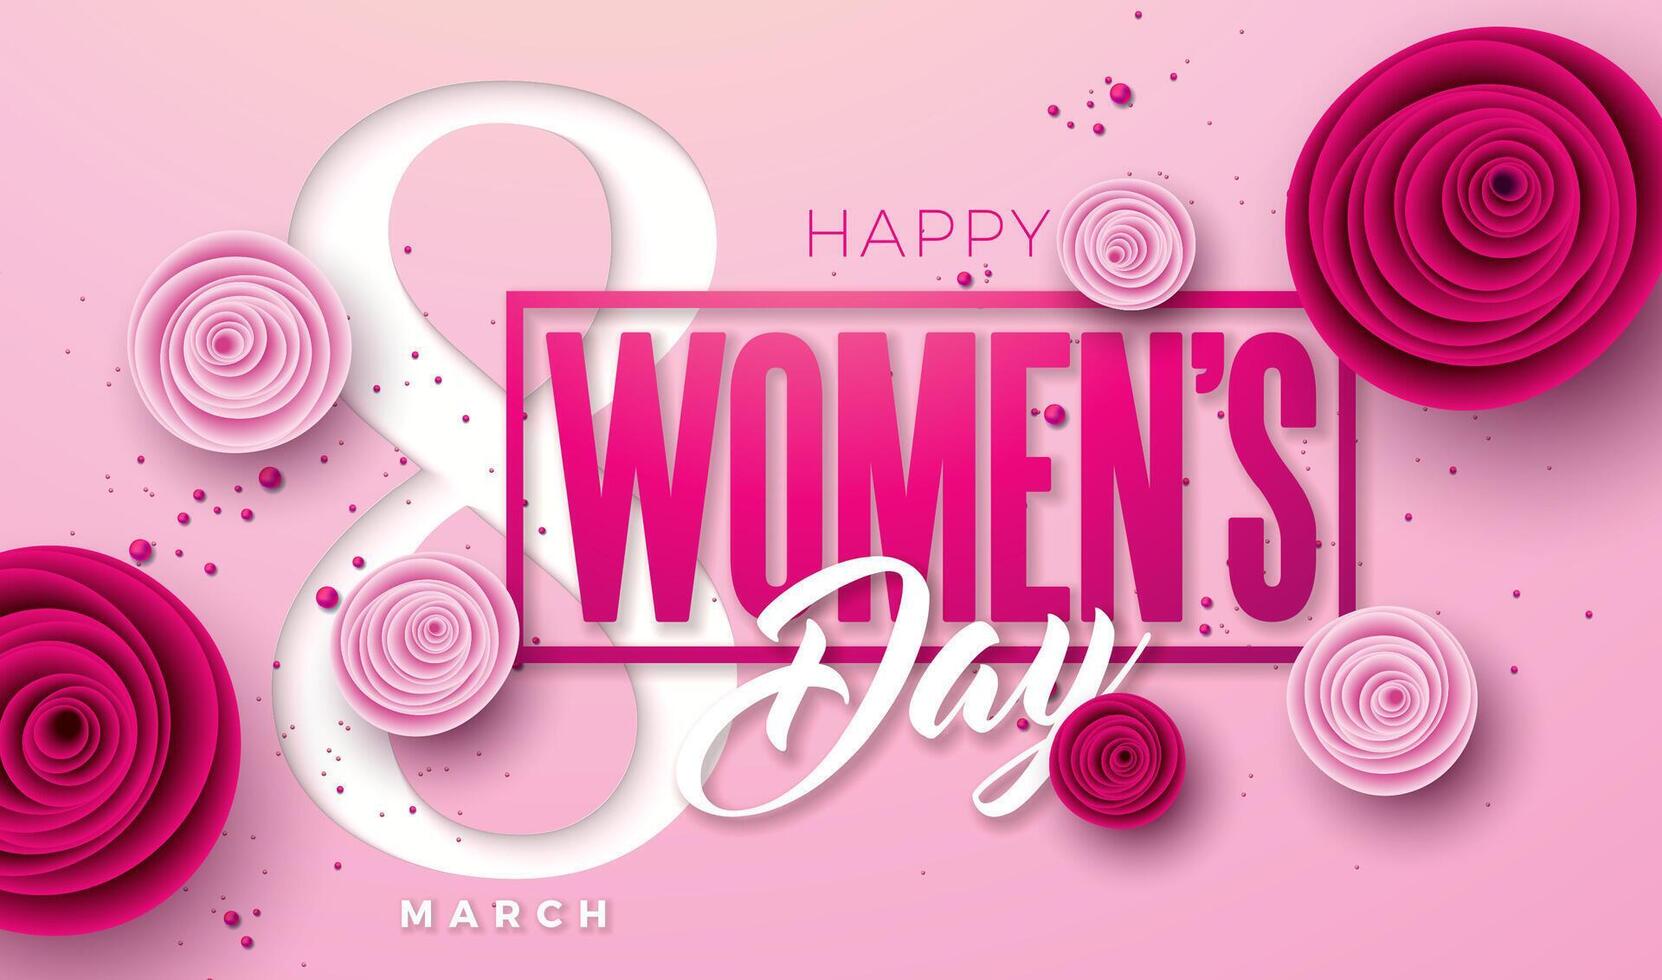 8 March. Happy Women's Day Floral Illustration. International Womens Day Vector Design with Rose Flower and Typography Letter on Light Pink Background. Woman or Mother Day Theme Template for Flyer